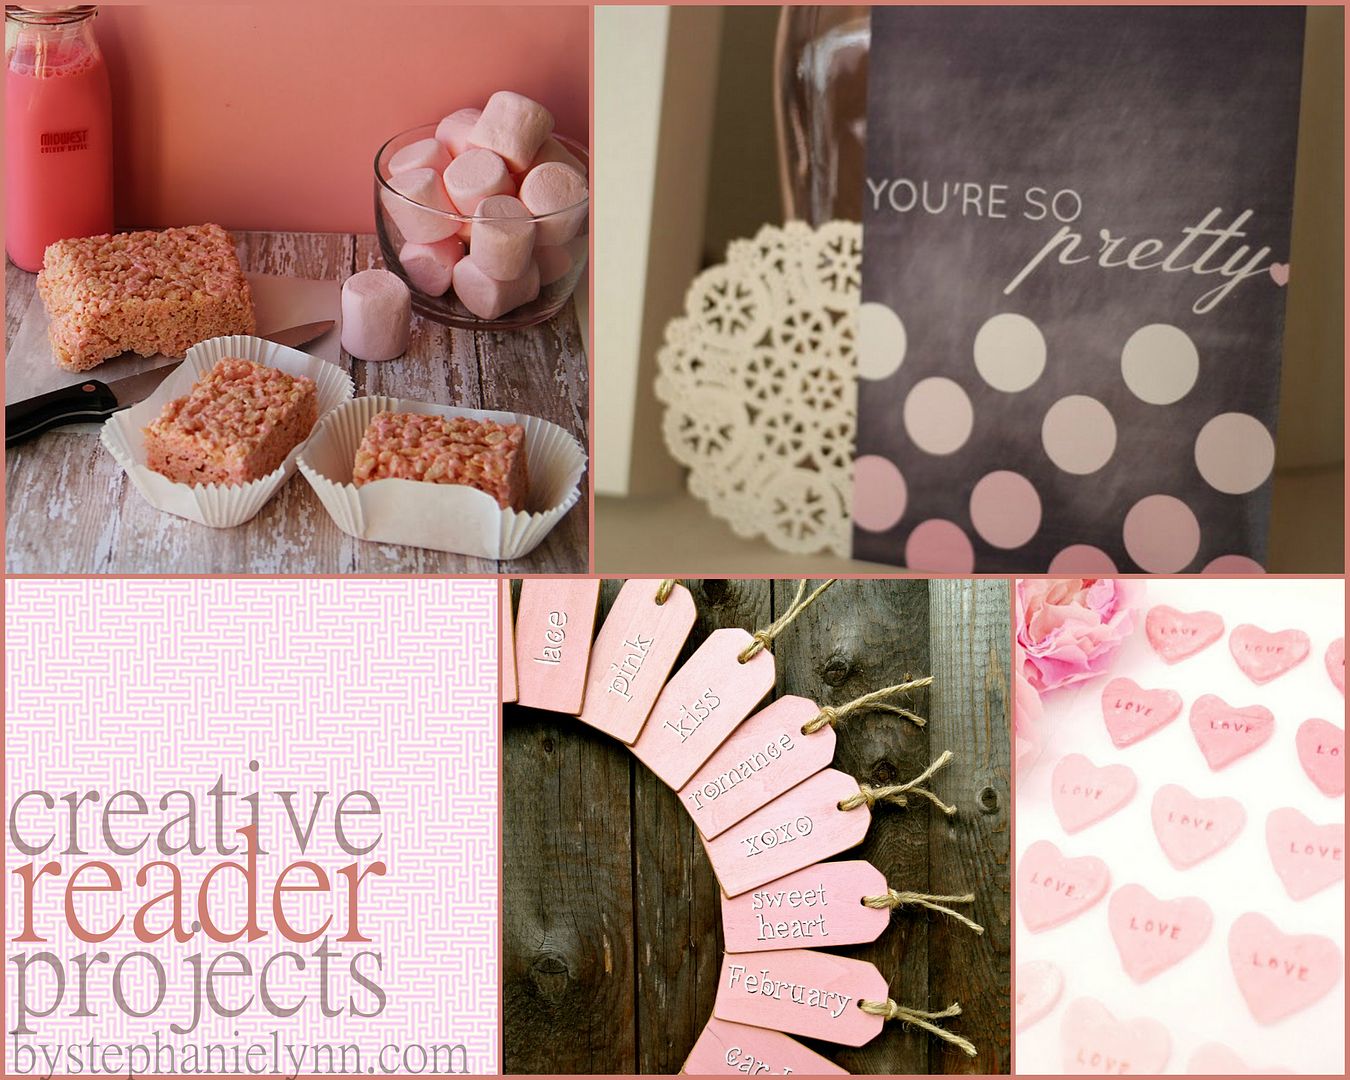 Creative Reader Projects No. 184: Valentine’s Day Crafts, Decor, and Recipes